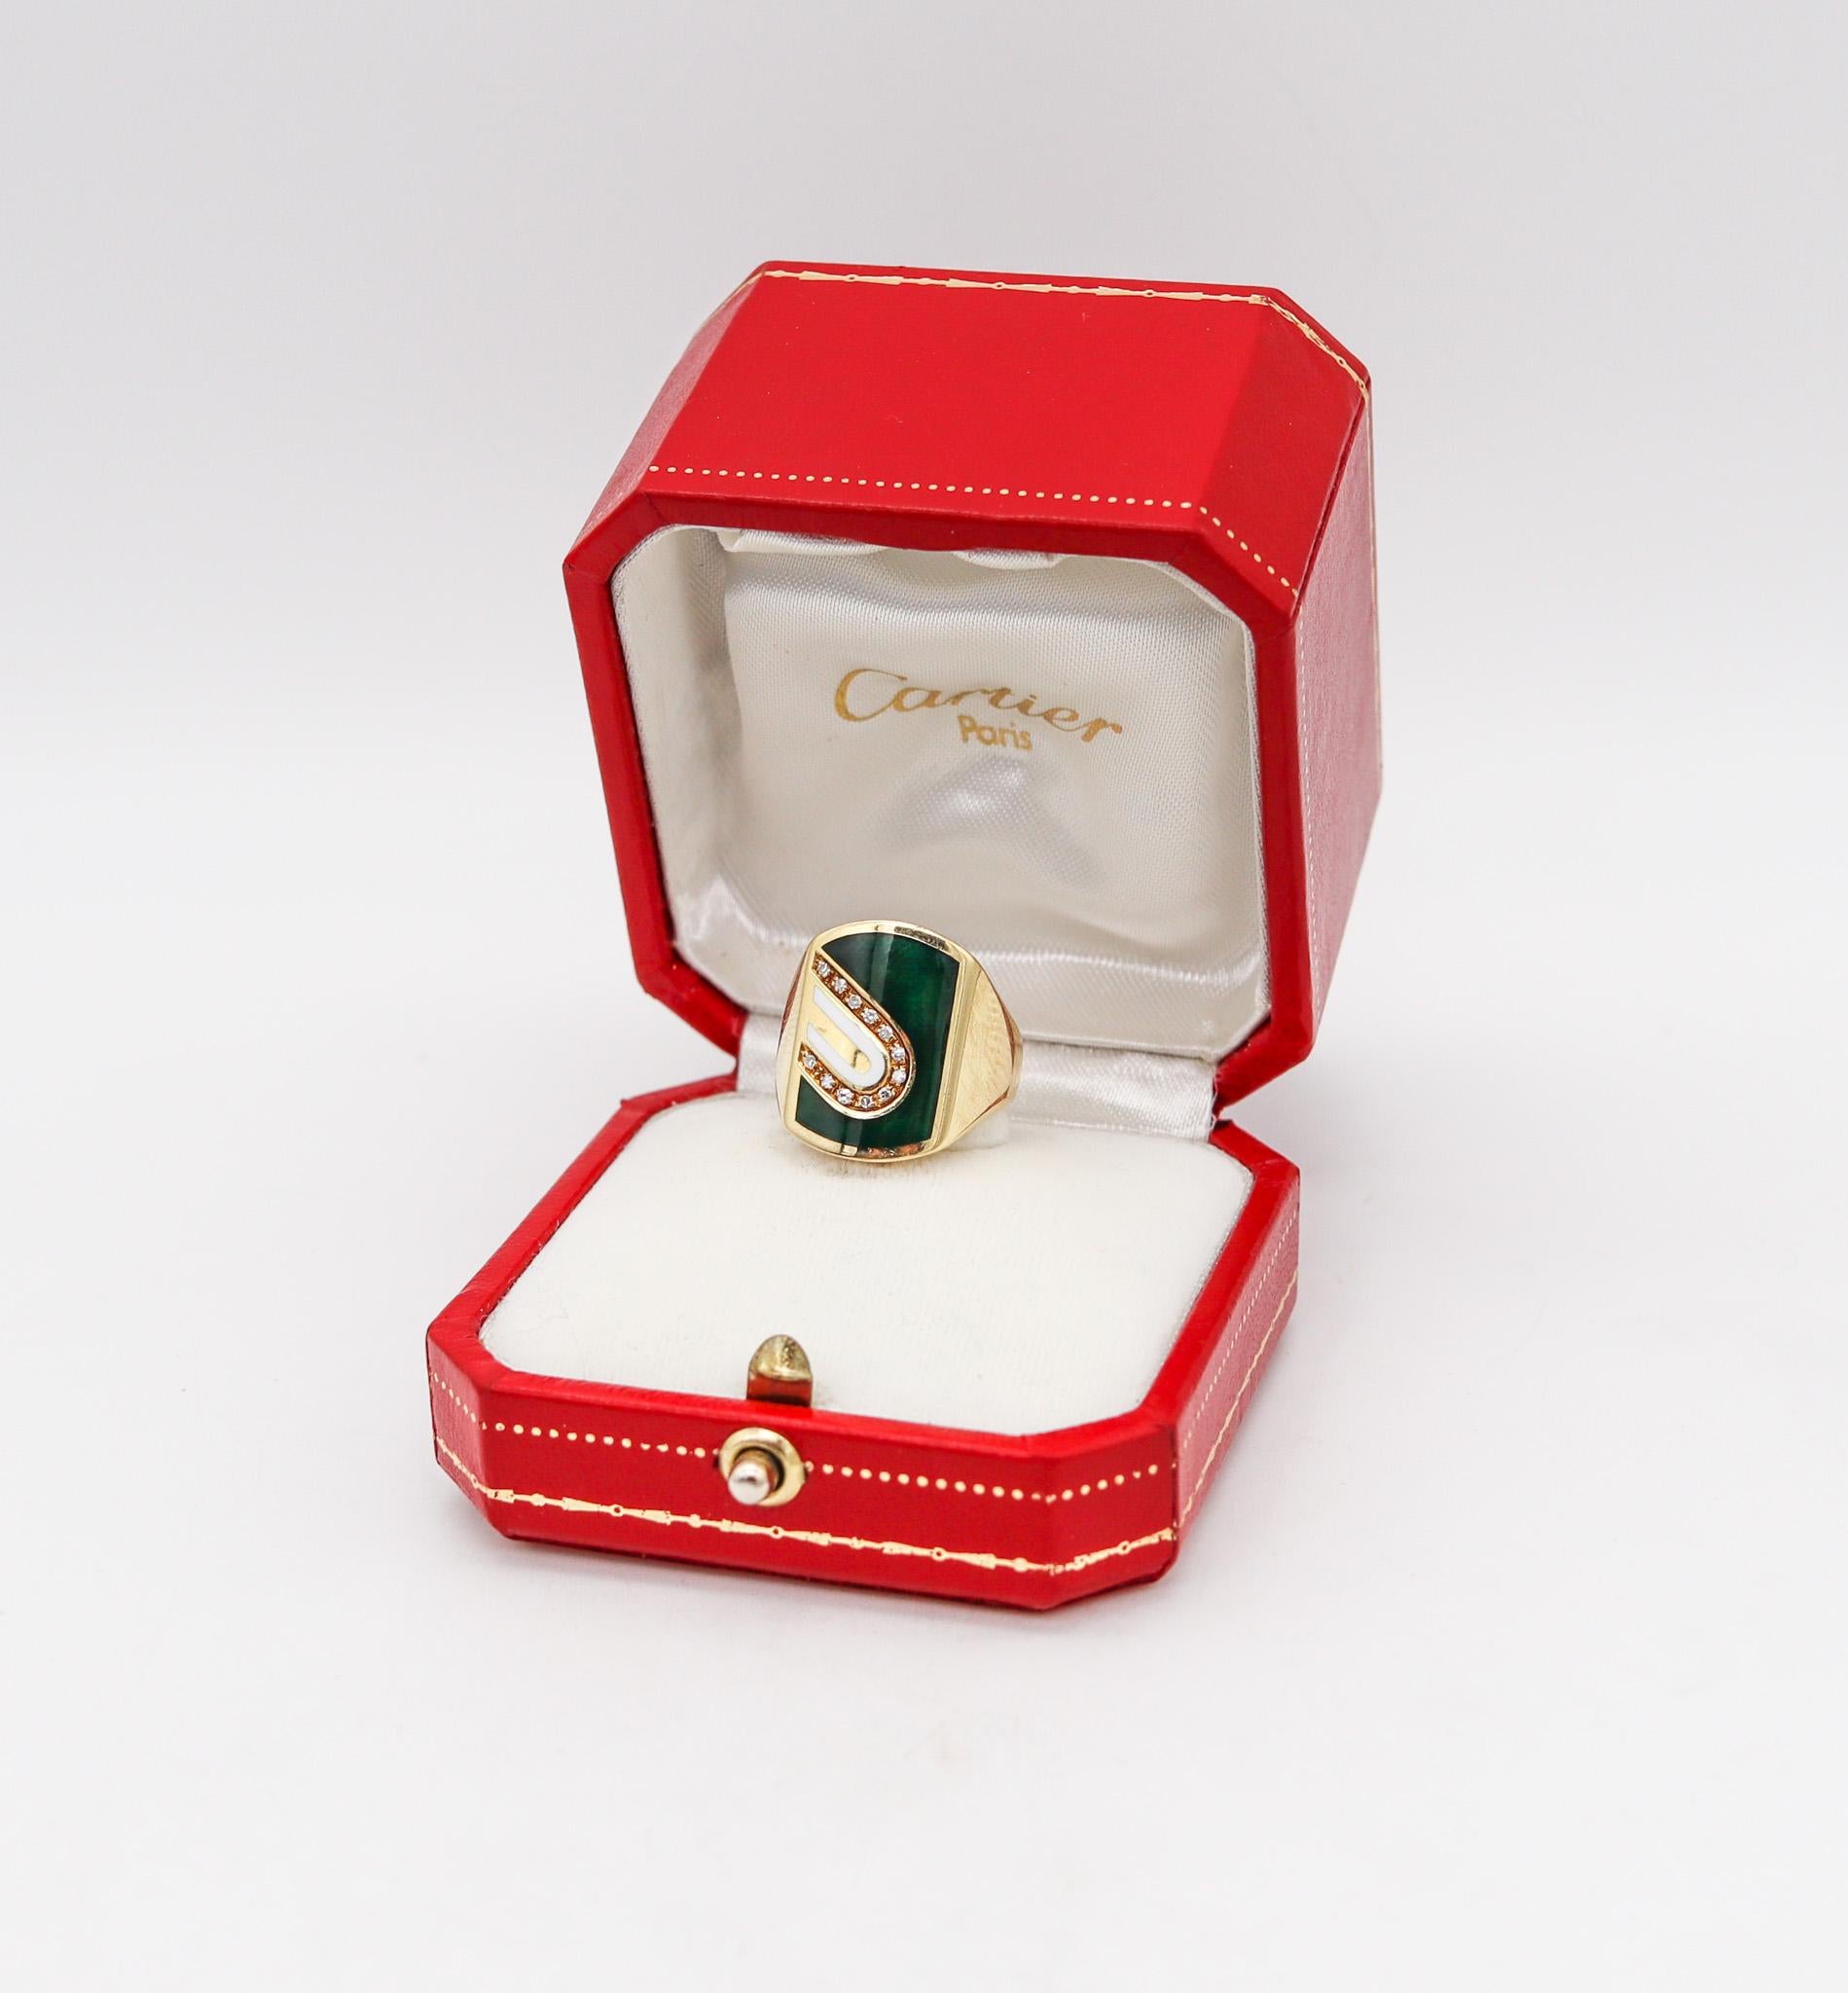 Geometric signet ring designed by Cartier.

Very unusual signet ring, created back in the 1970 by the jewelry house of Cartier. This ring has been crafted as a piece of Italian art in solid yellow gold of 18 karats with high polished finish.